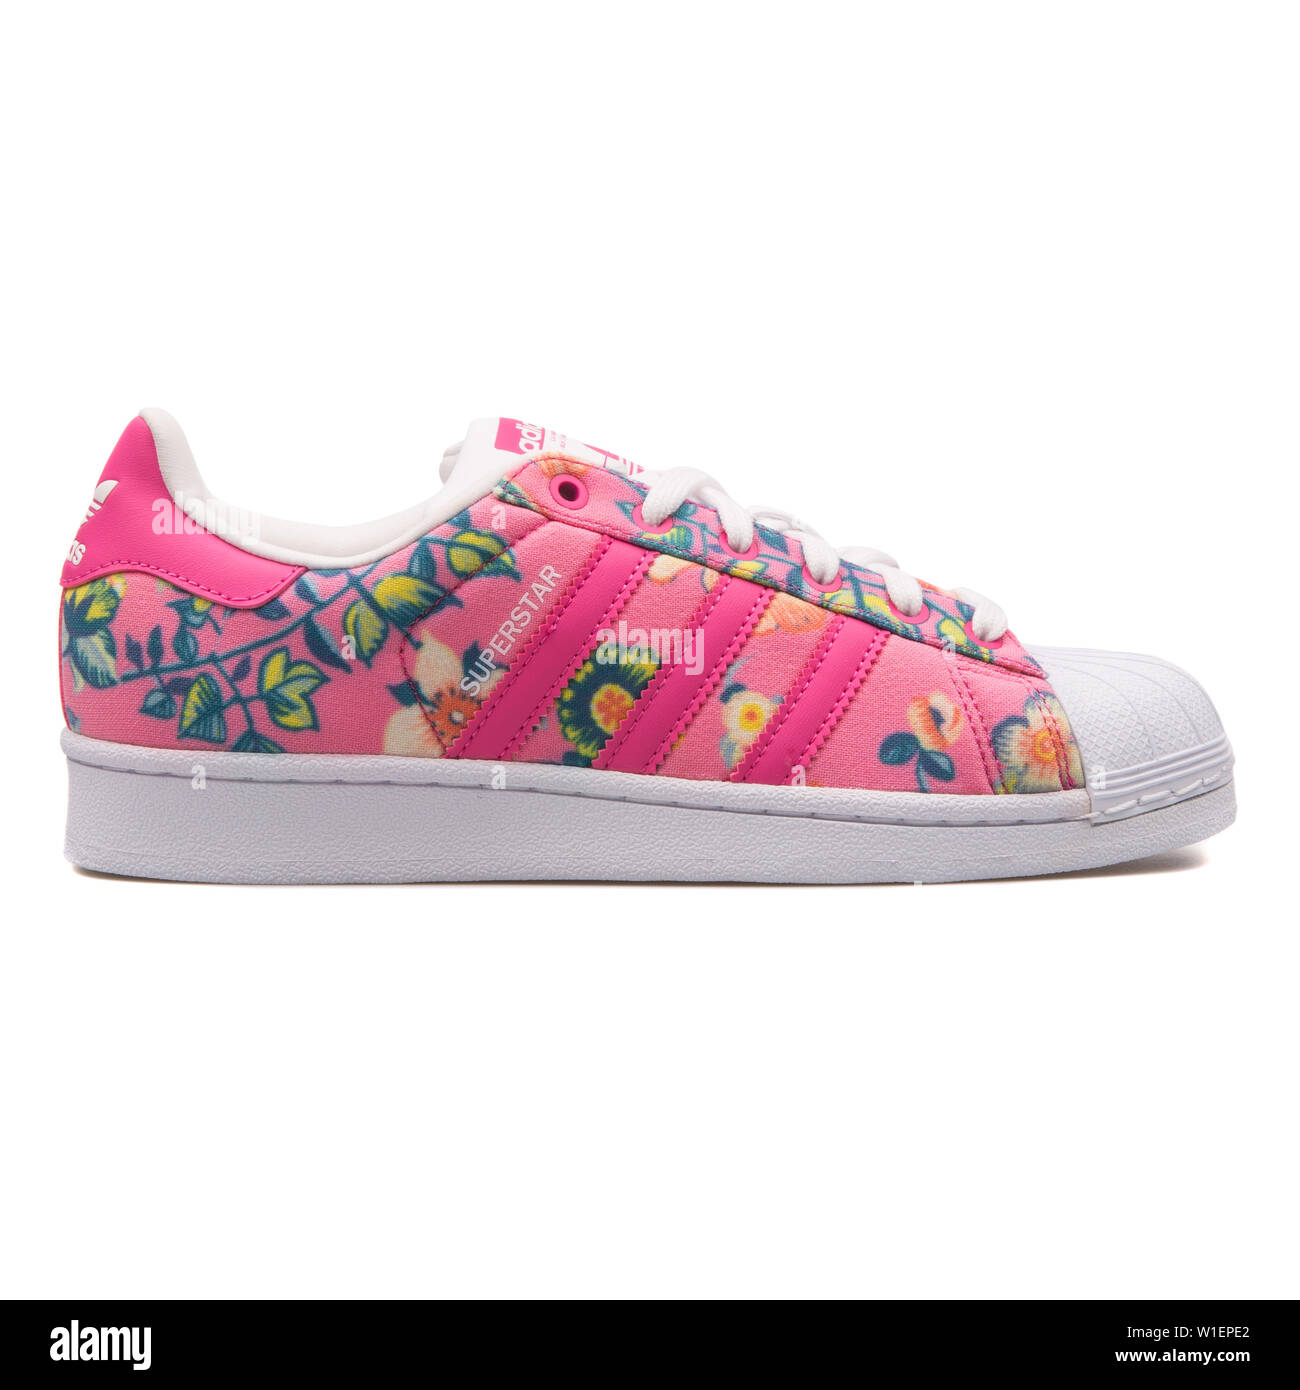 VIENNA, AUSTRIA - AUGUST 10, 2017: Adidas Superstar pink and floral print  sneaker on white background Stock Photo - Alamy